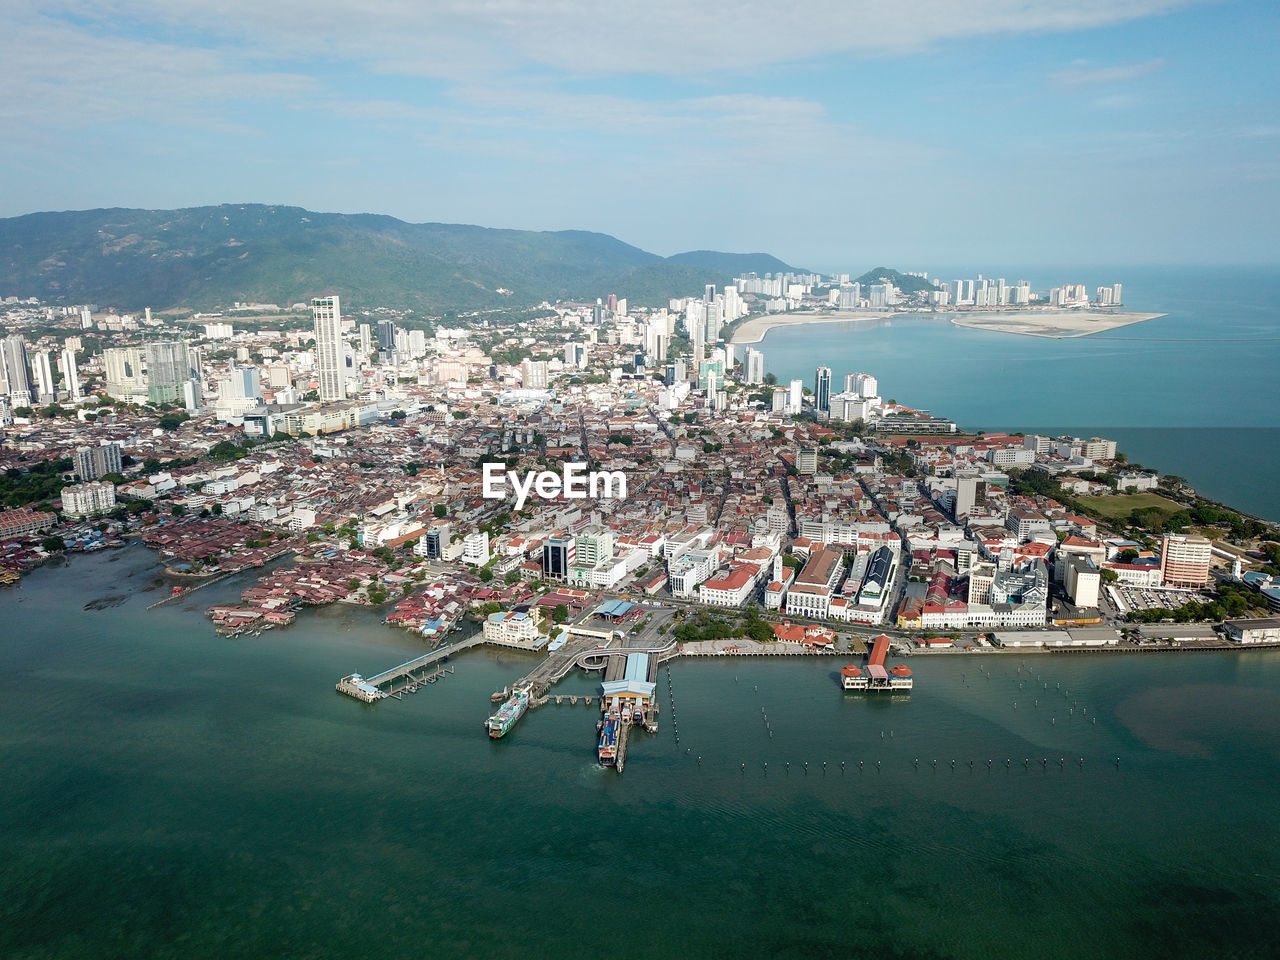 Aerial view penang ferry terminal with background unesco world heritage site georgetown.